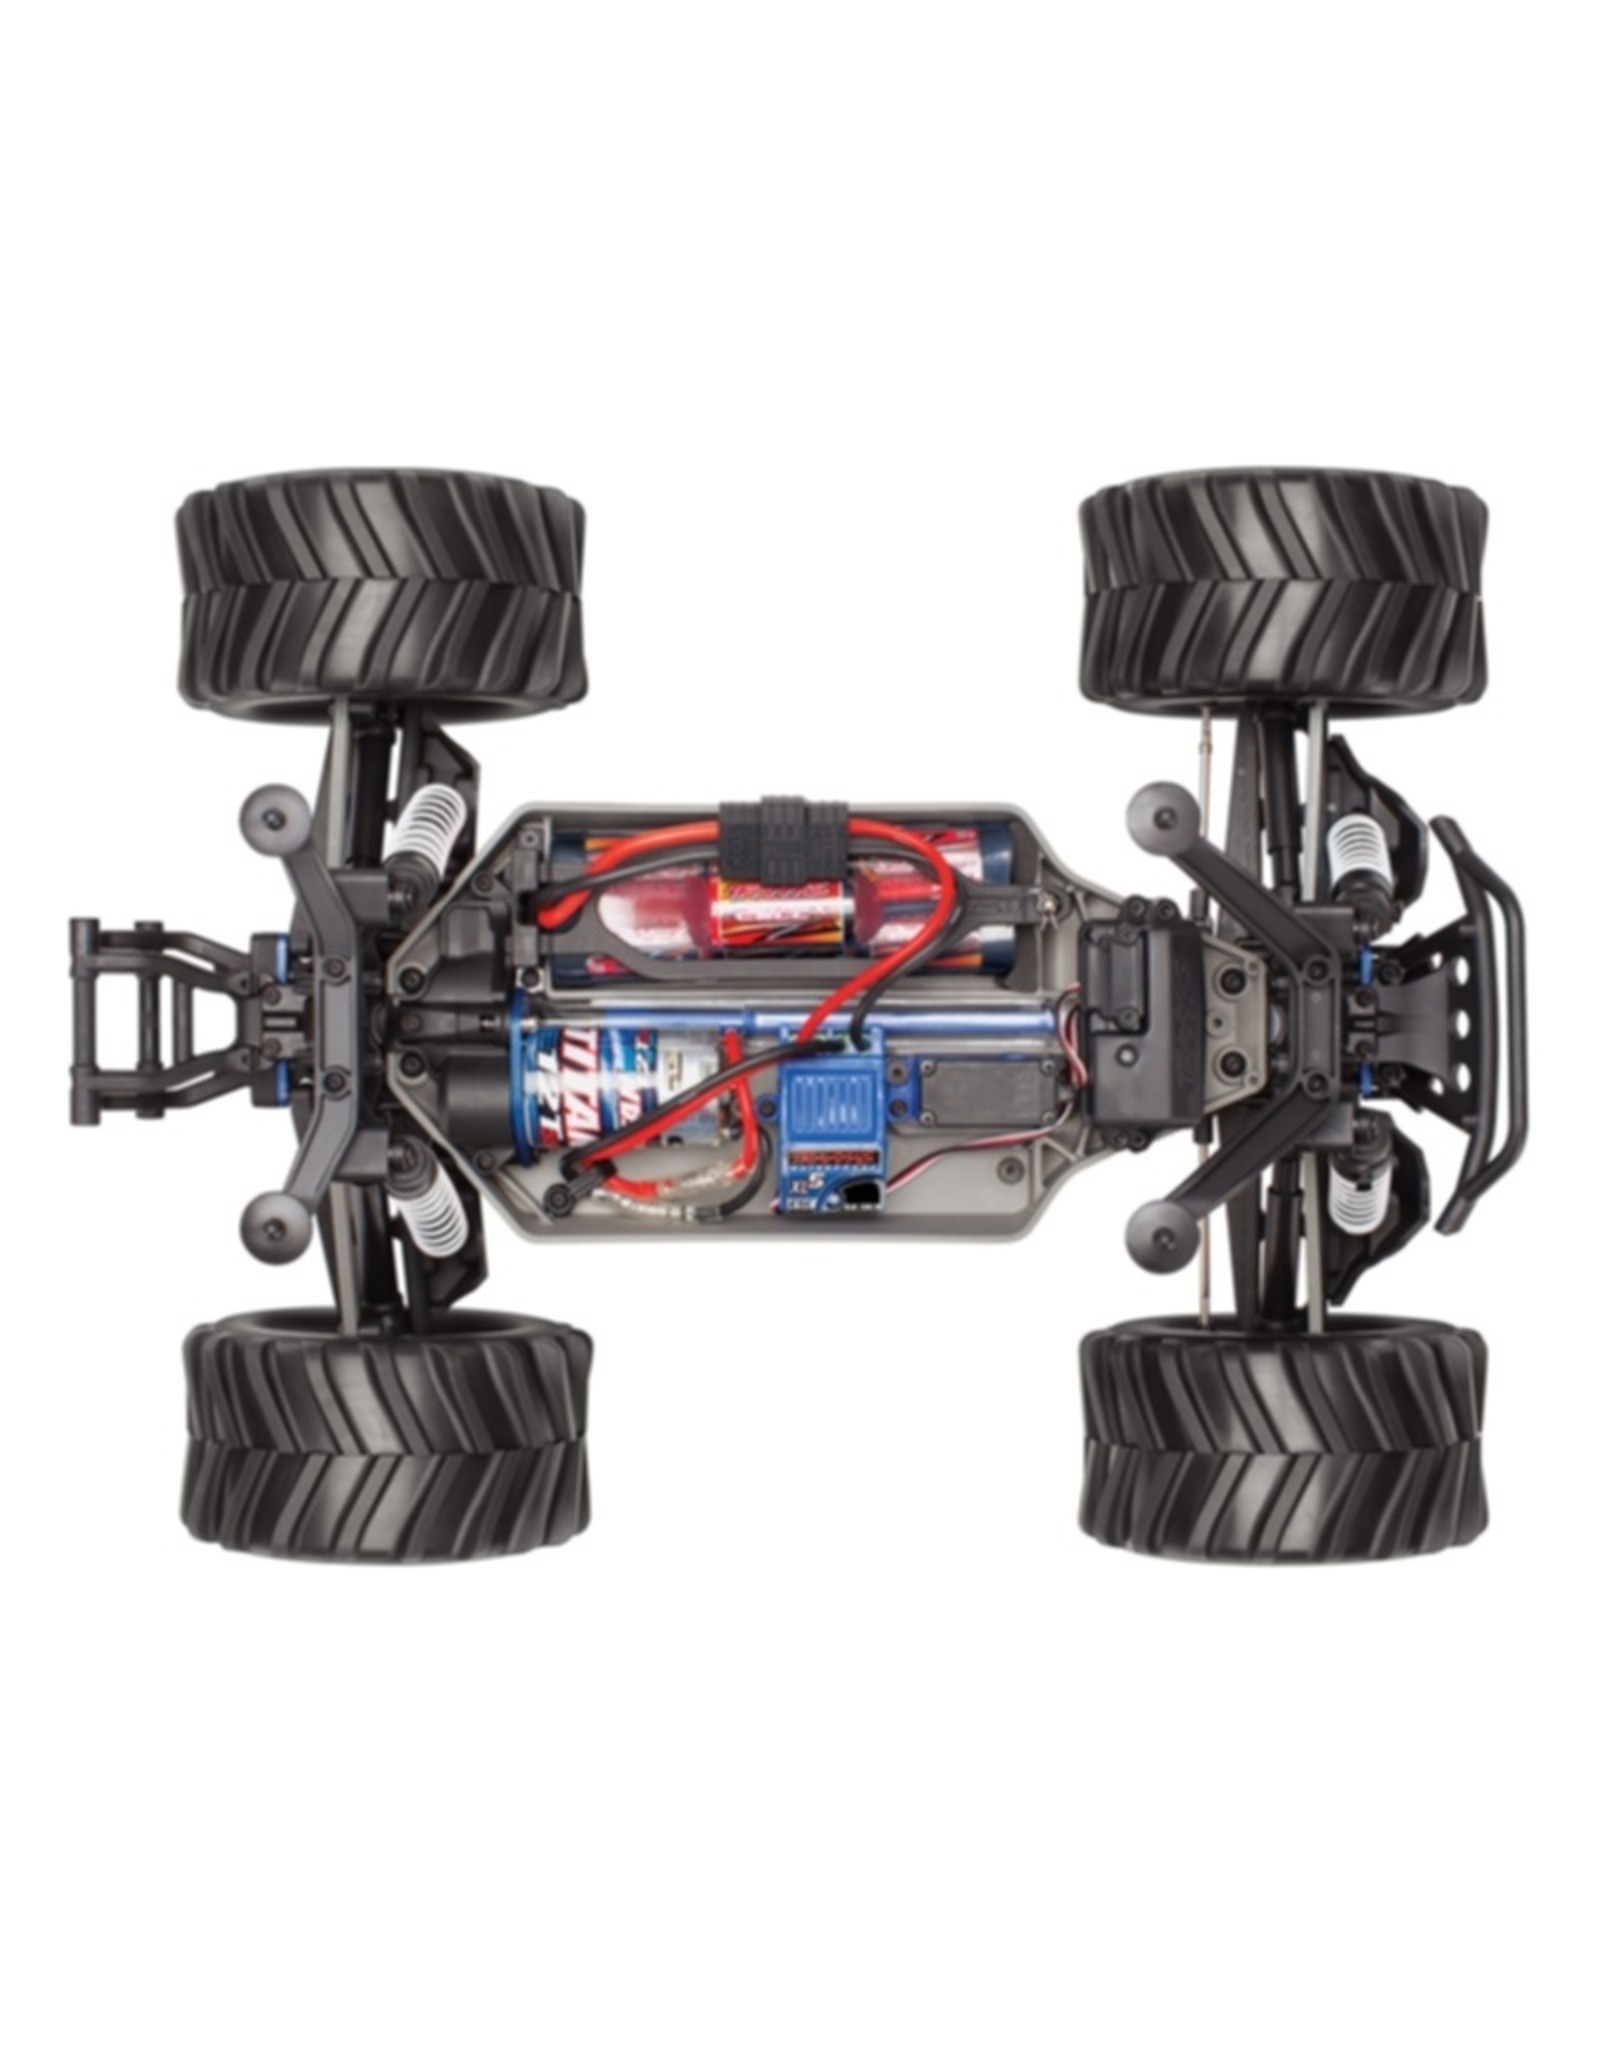 Traxxas TRA67054-1 BLK STAMPEDE 4X4 BRUSHED, Stampede® 4X4 : 1/10-scale 4WD Monster Truck. Ready-To-Race® with TQ 2.4GHz radio system and XL-5 ESC (fwd/rev). Includes: 7-Cell NiMH 3000mAh Traxxas® batte